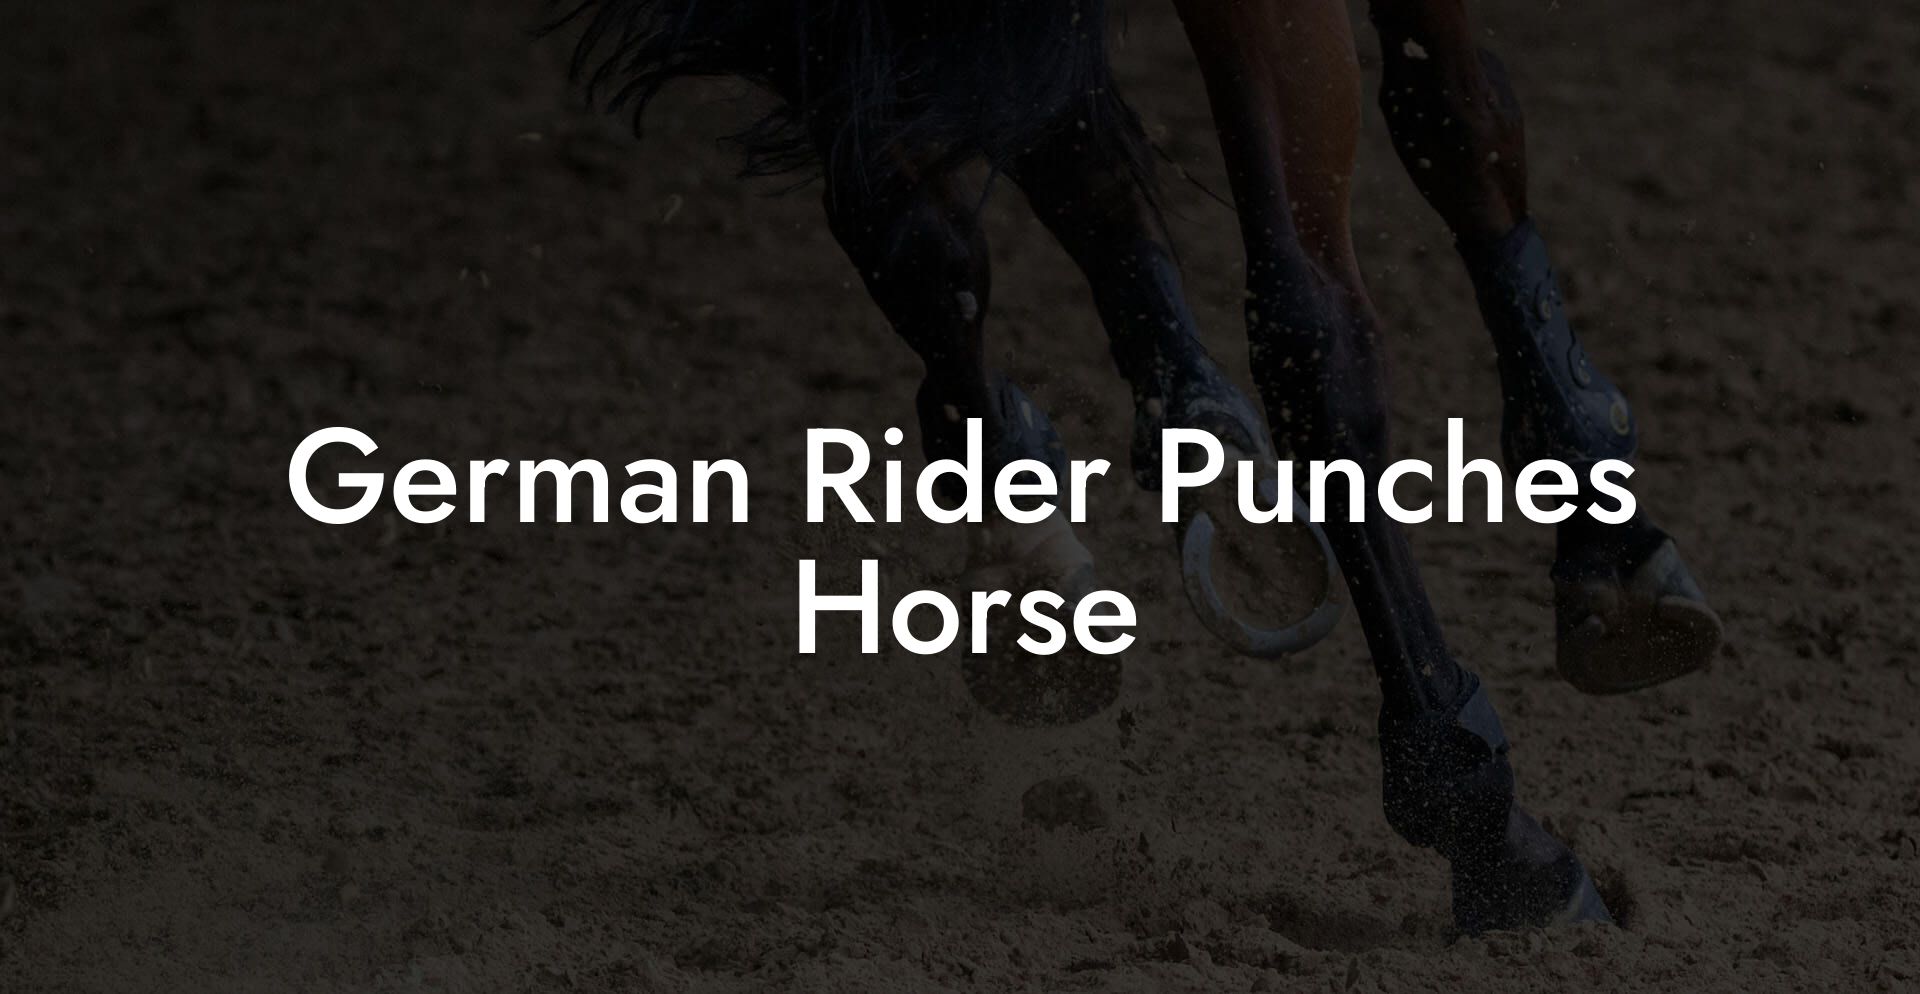 German Rider Punches Horse